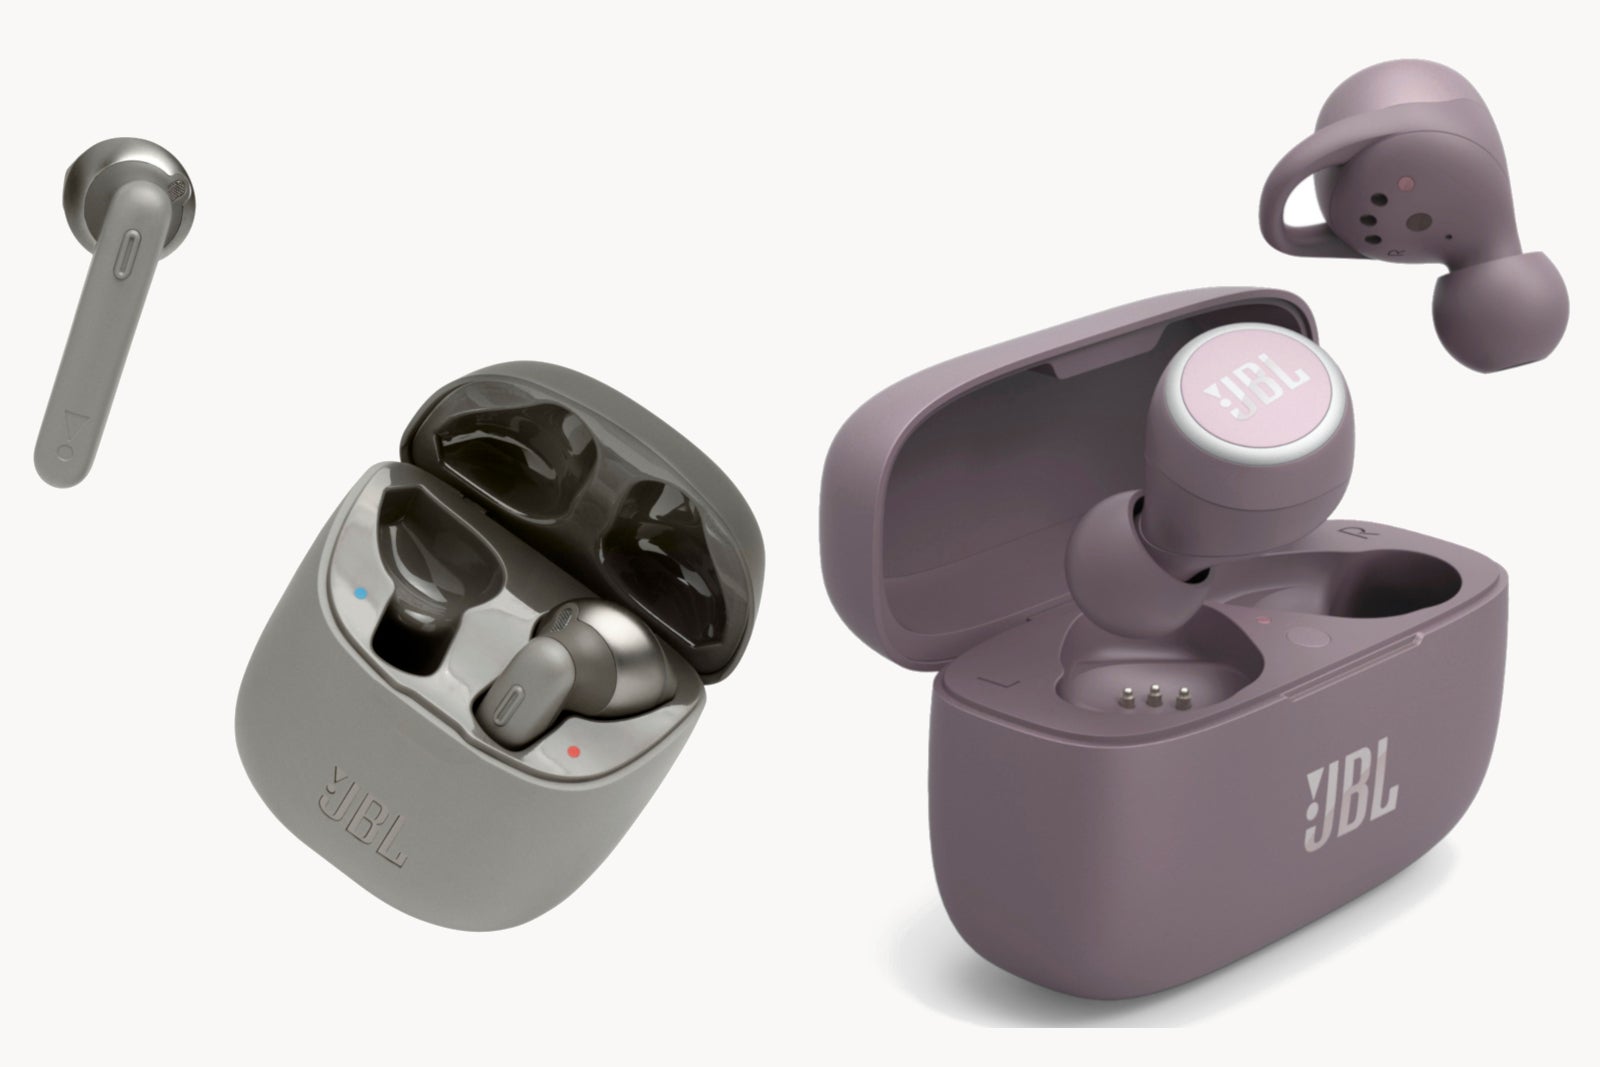 JBL TUNE 220TWS and JBL LIVE 300TWS earbuds - Competition stiffens for Apple's AirPods as JBL and Panasonic launch new products